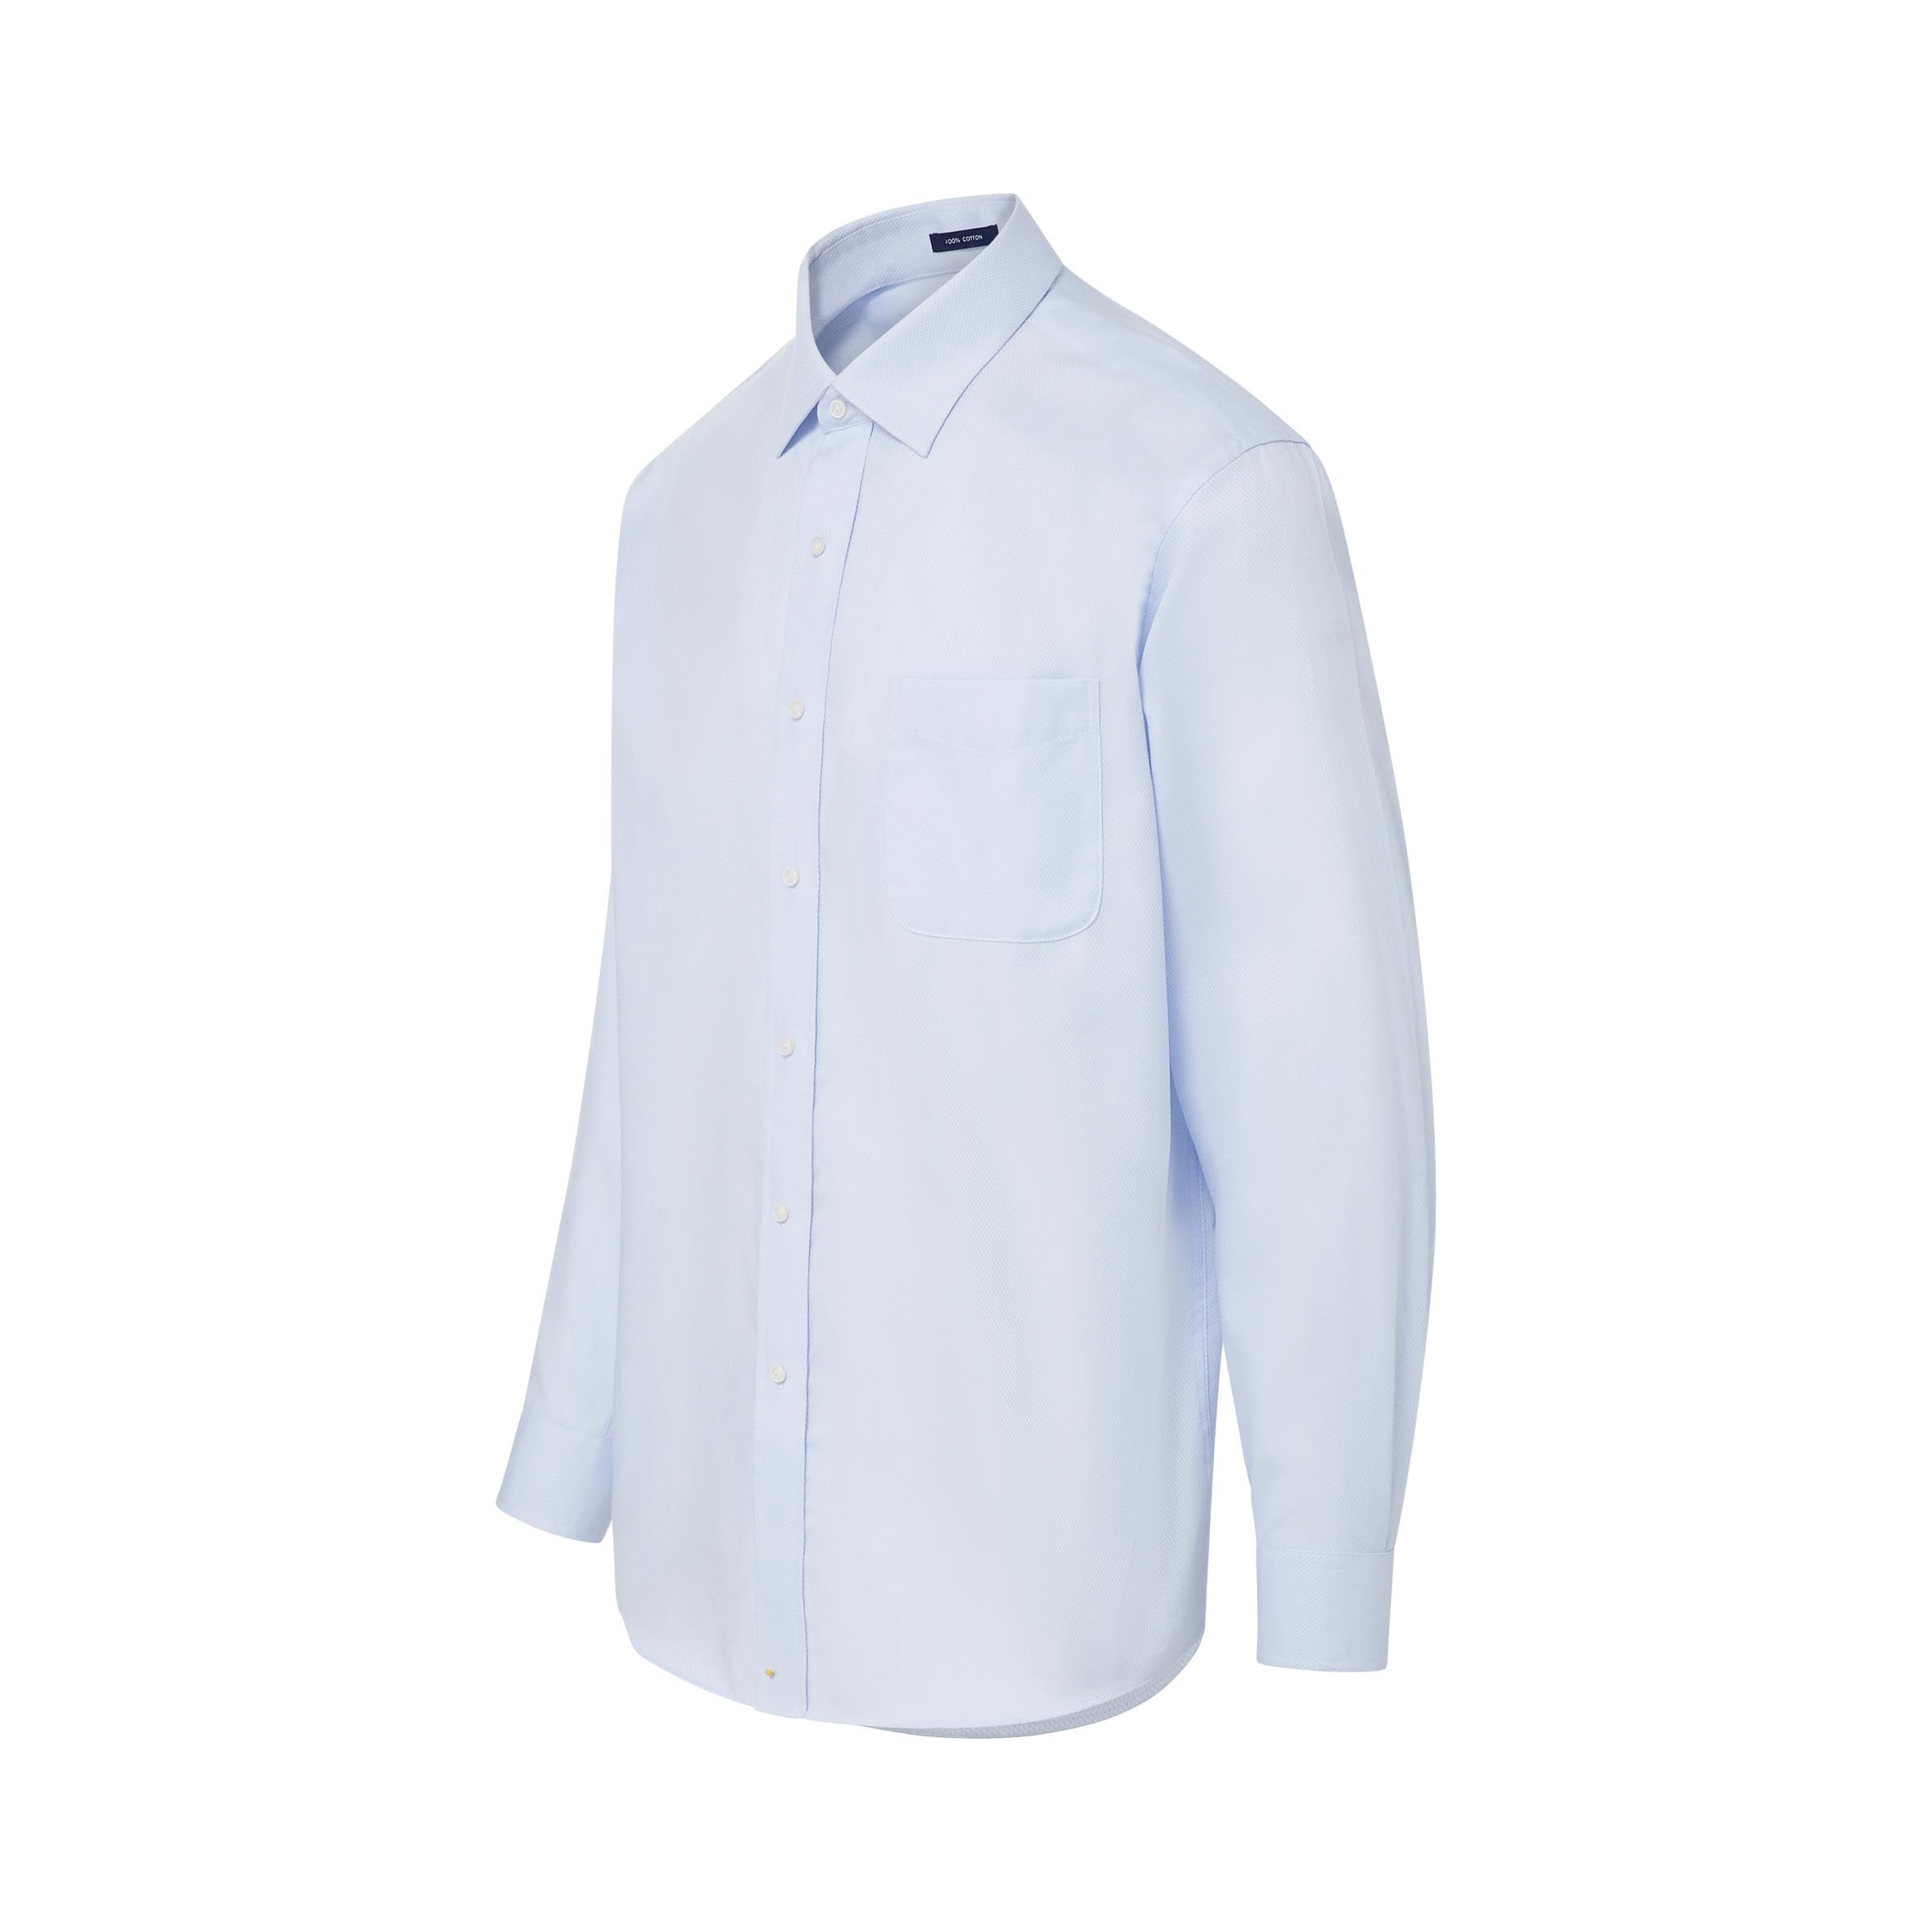 Classic Long Sleeve Light Blue ‘Ryan’ Dress Shirt with Magnetic Closures